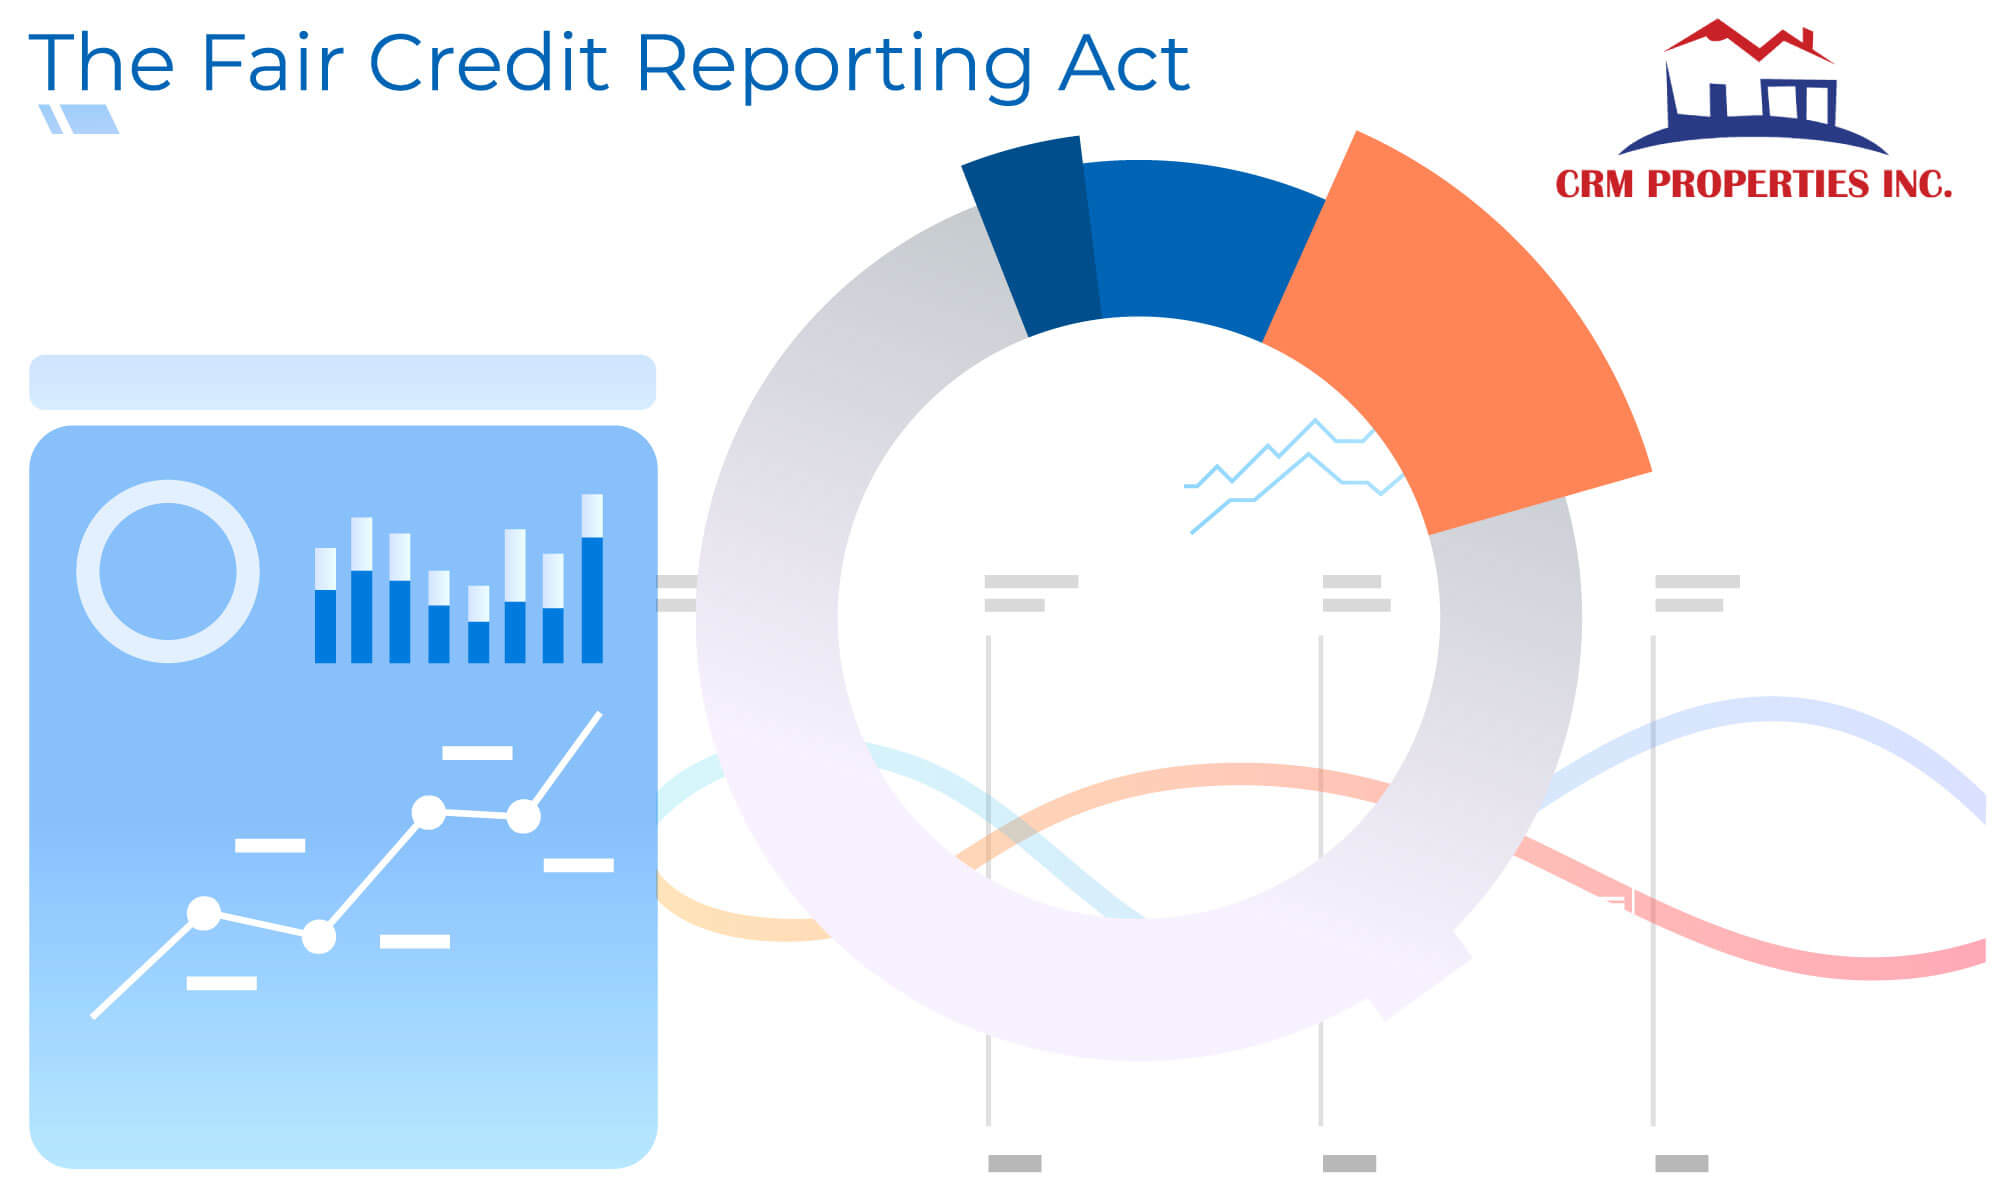 The Fair Credit Reporting Act